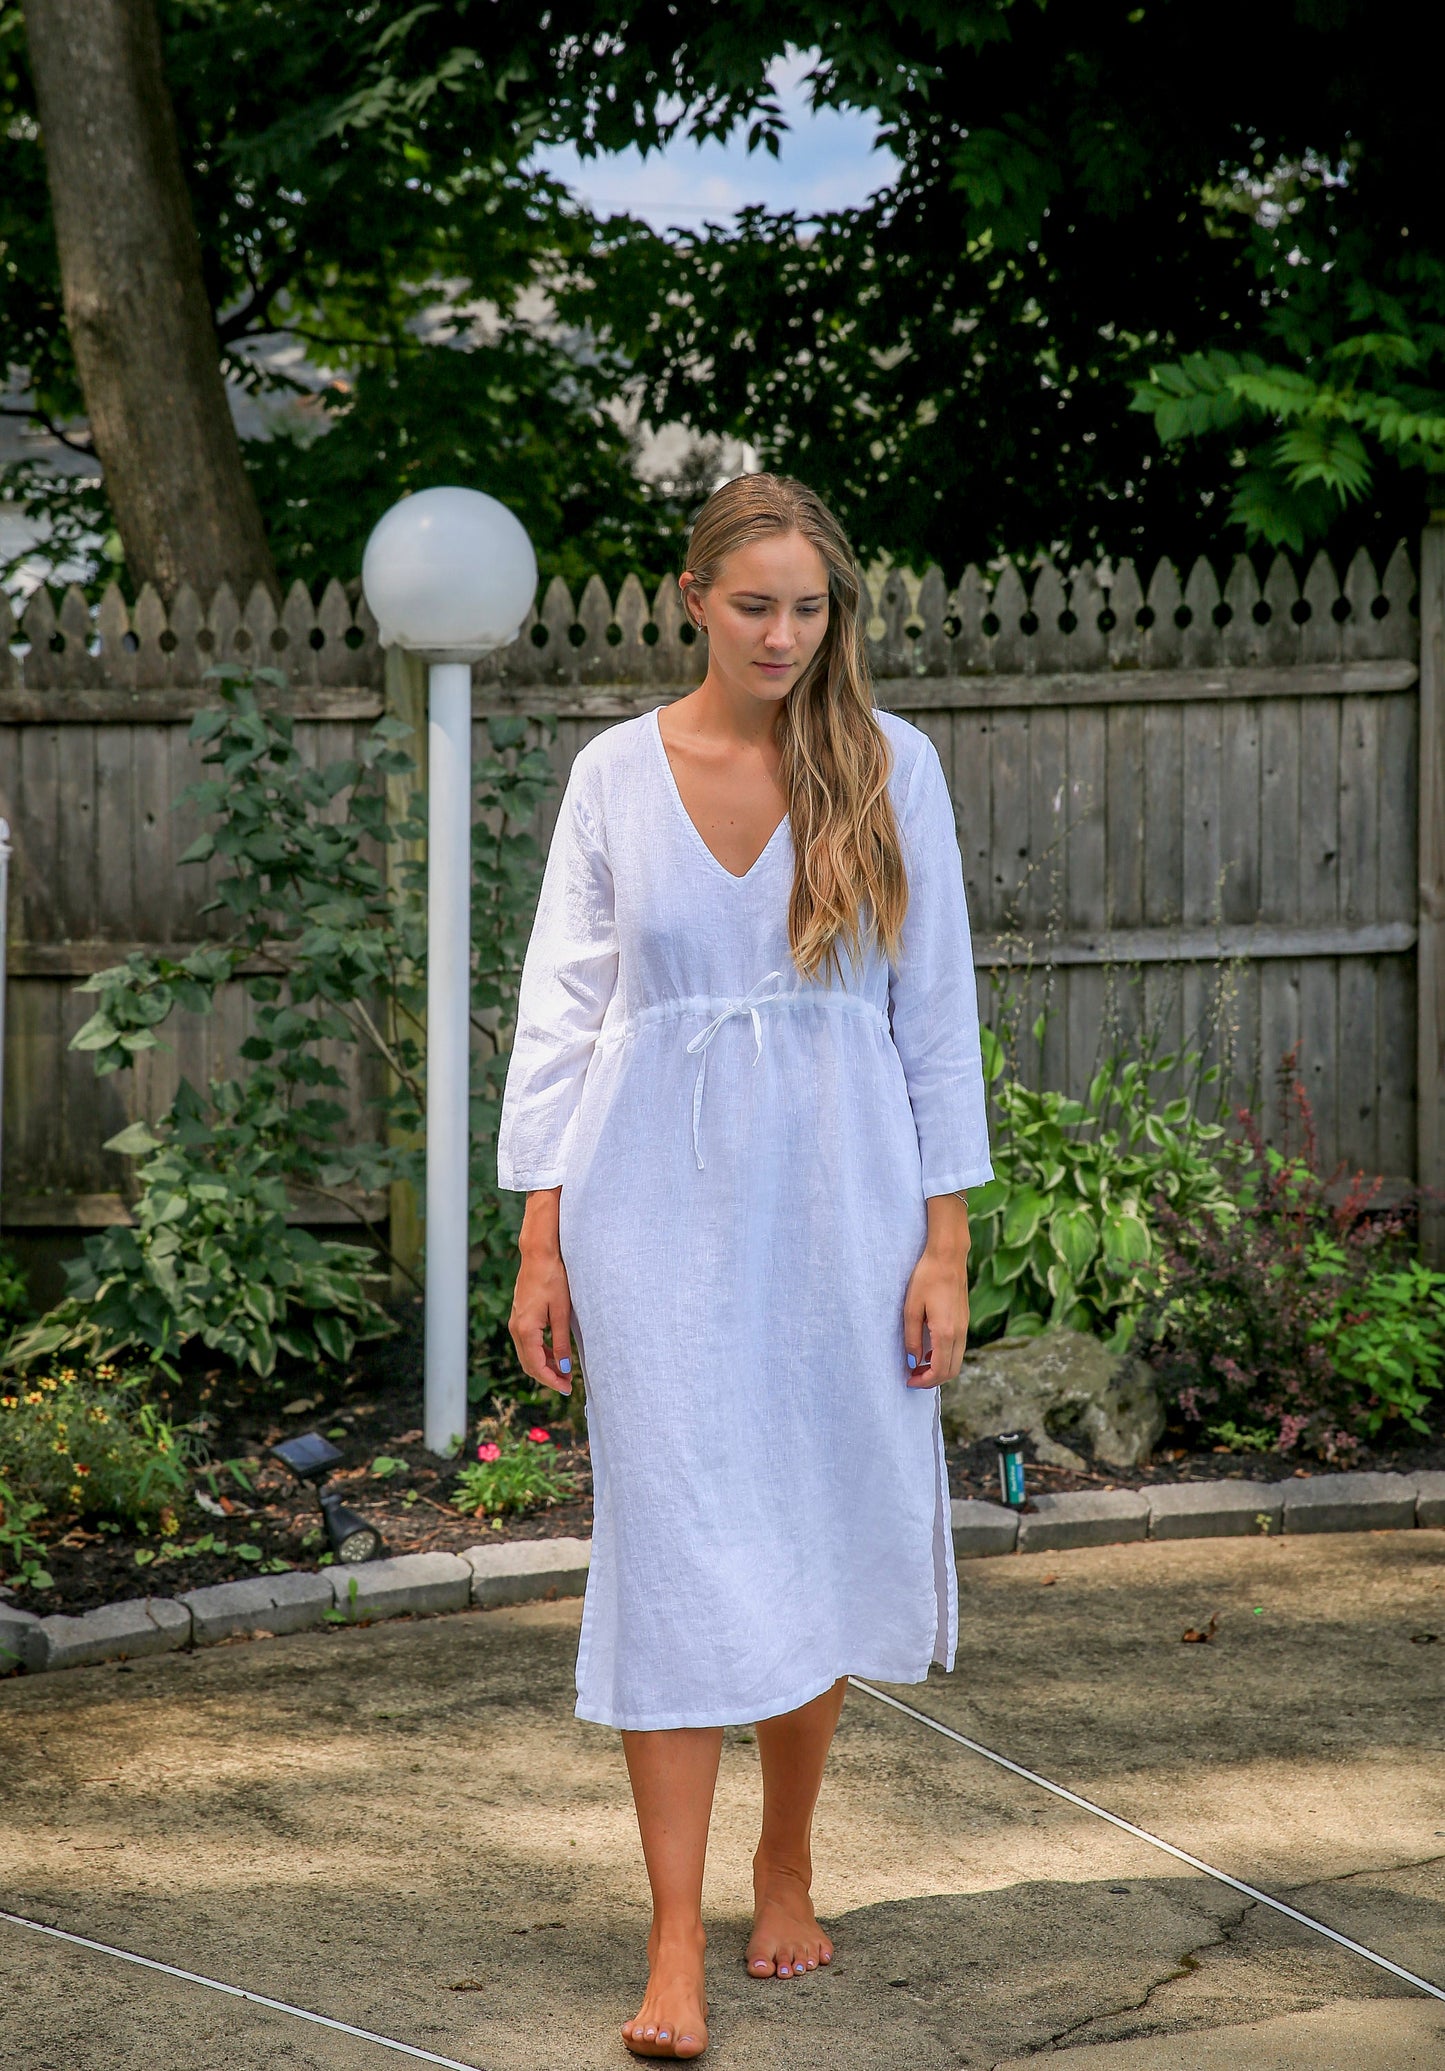 Rustic charm meets style with Vikolino's linen dress.